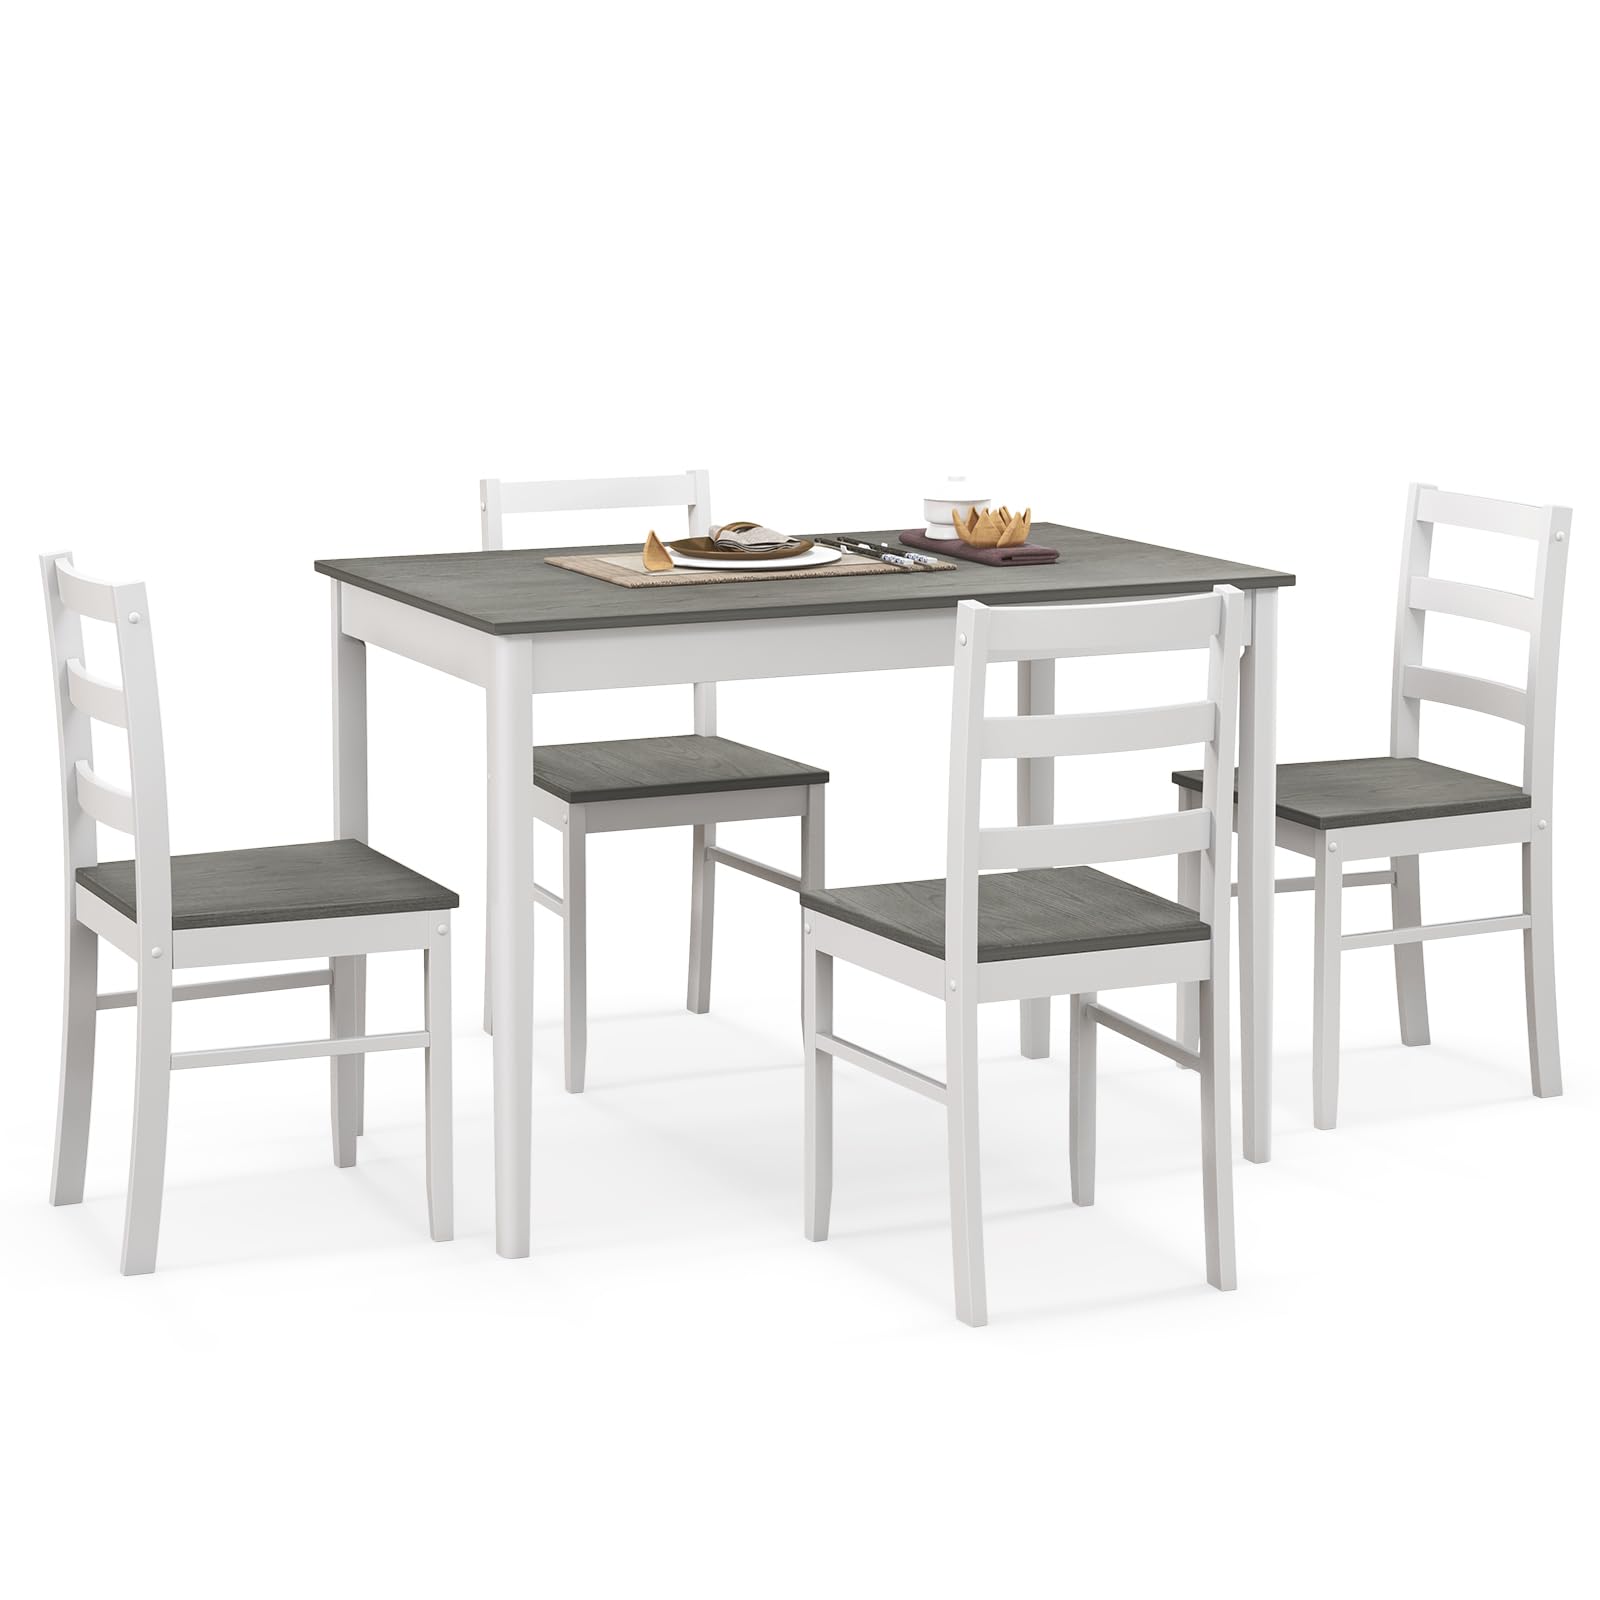 Giantex 5-Piece Dining Set of 4, Solid Wood Rectangular Table & 4 Chairs